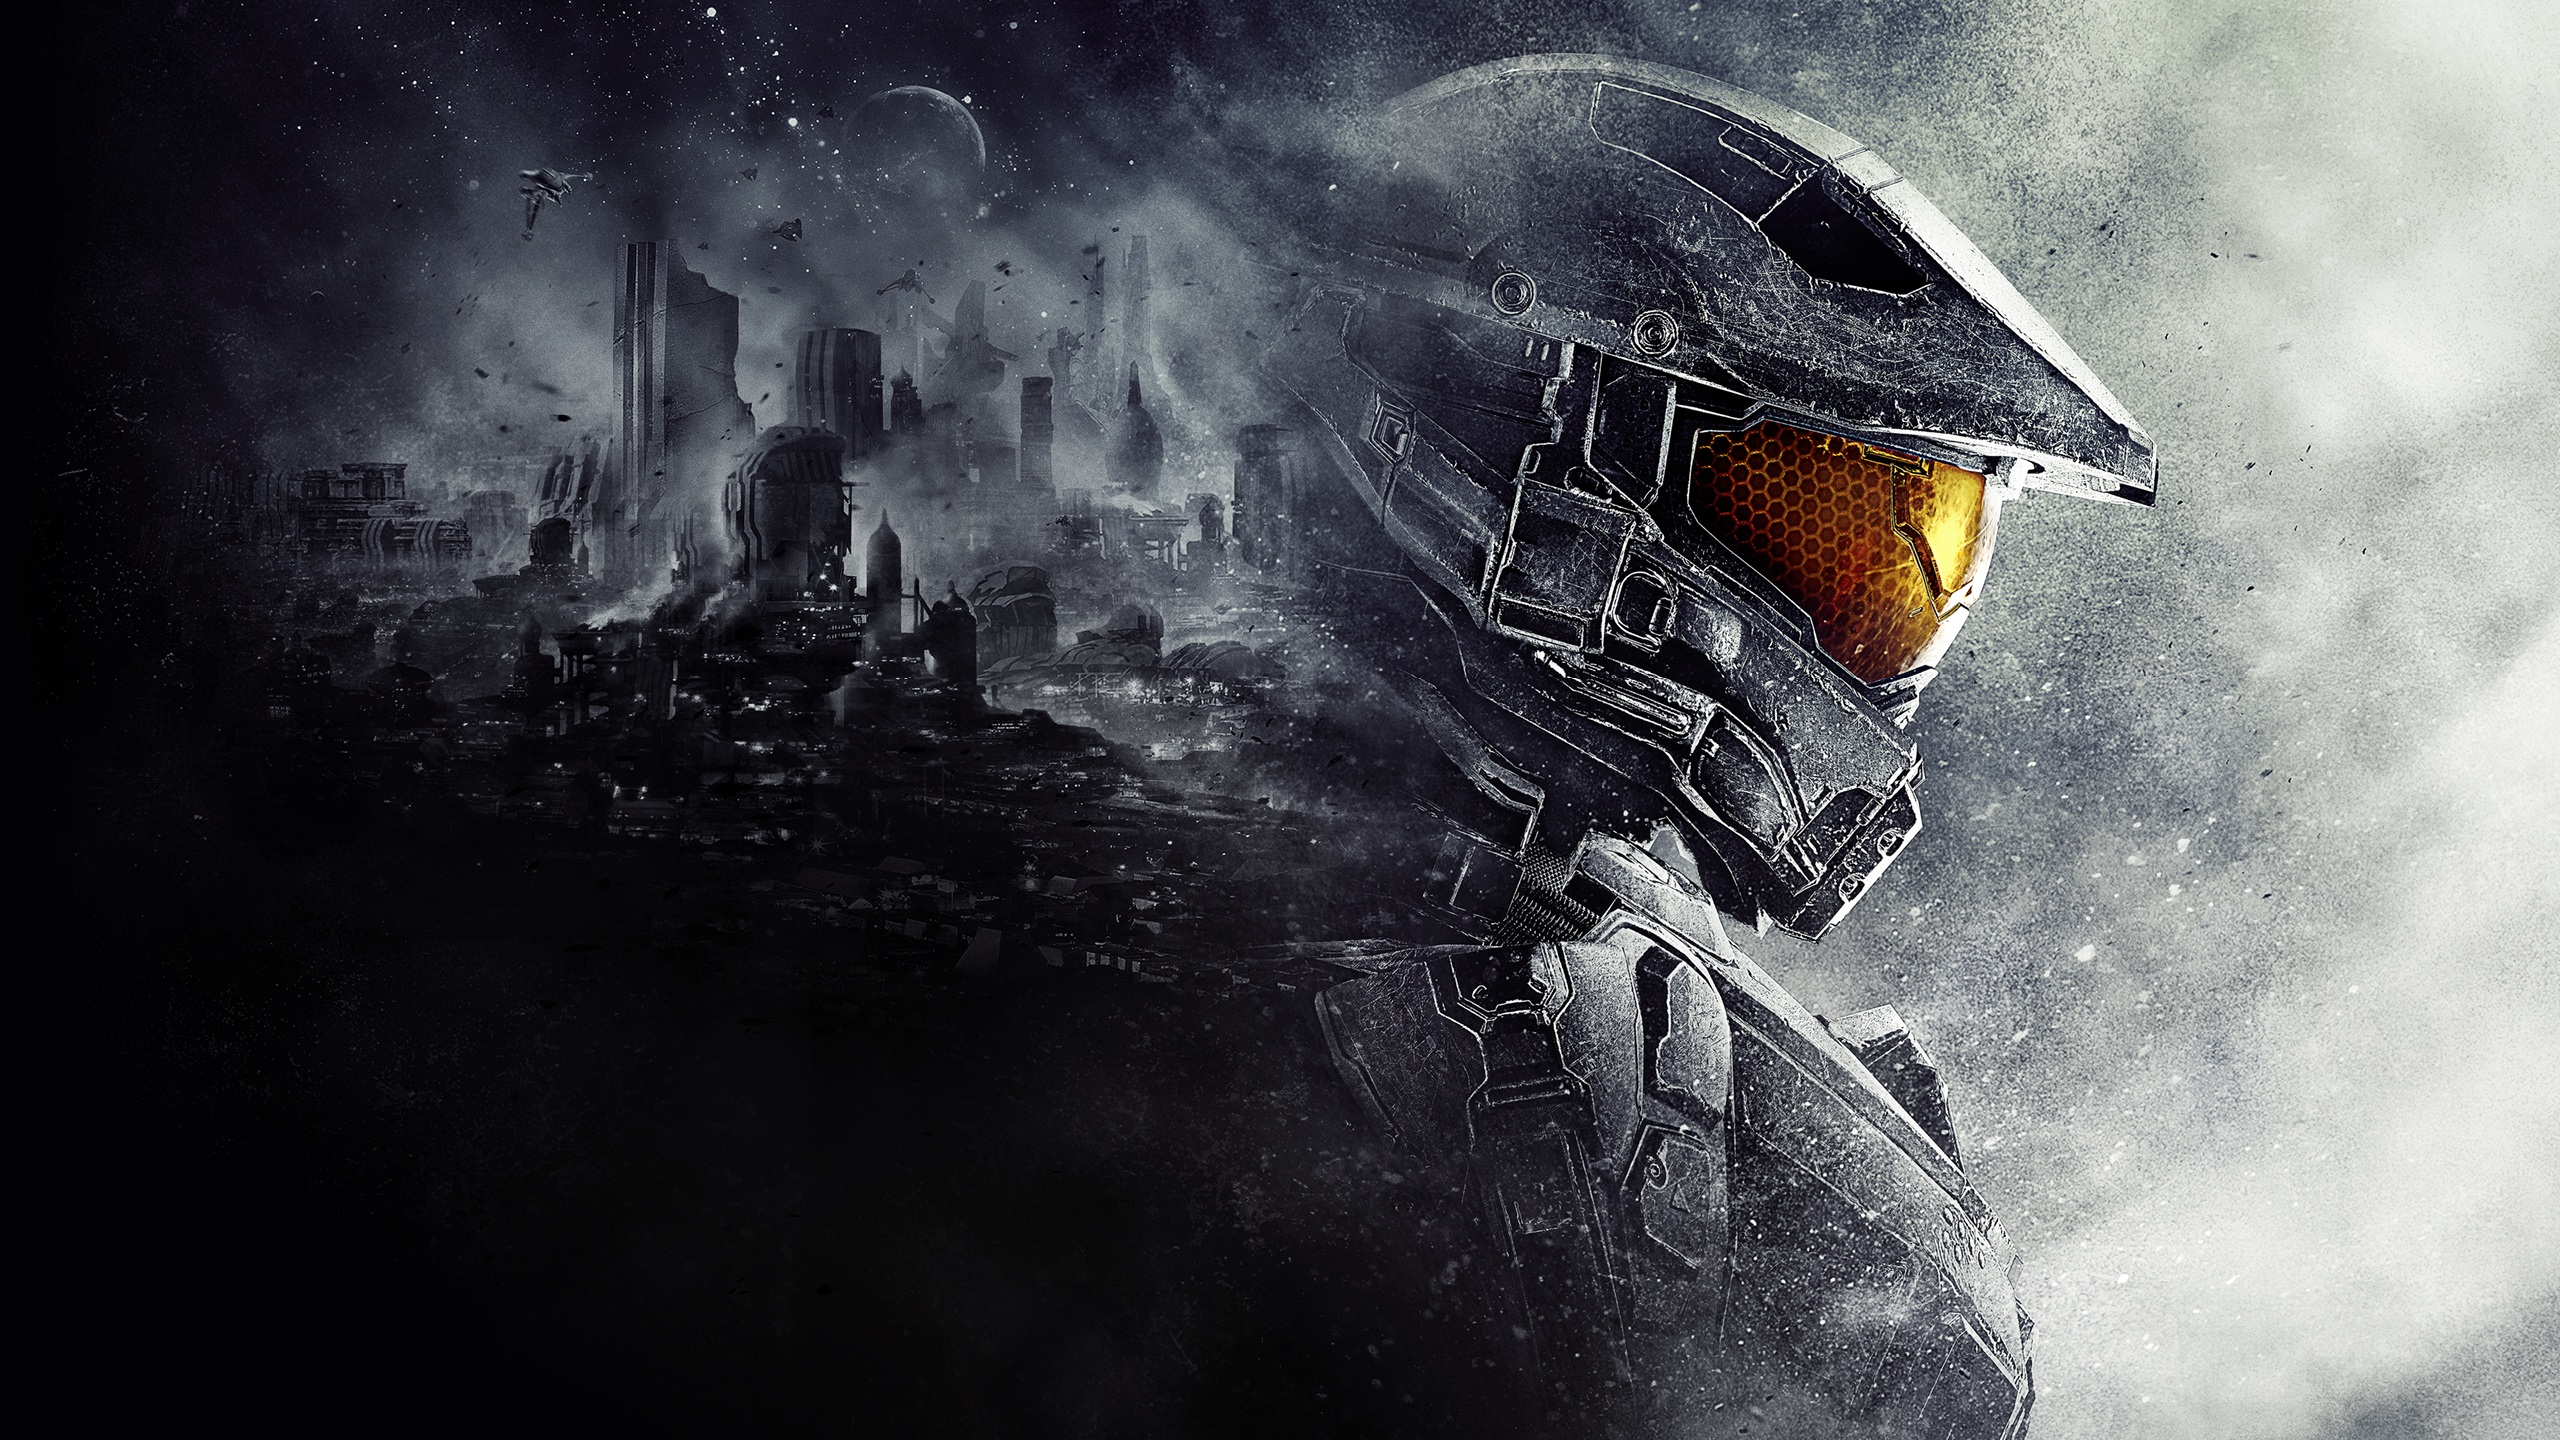 Halo Wallpaper 1080p Image In Collection